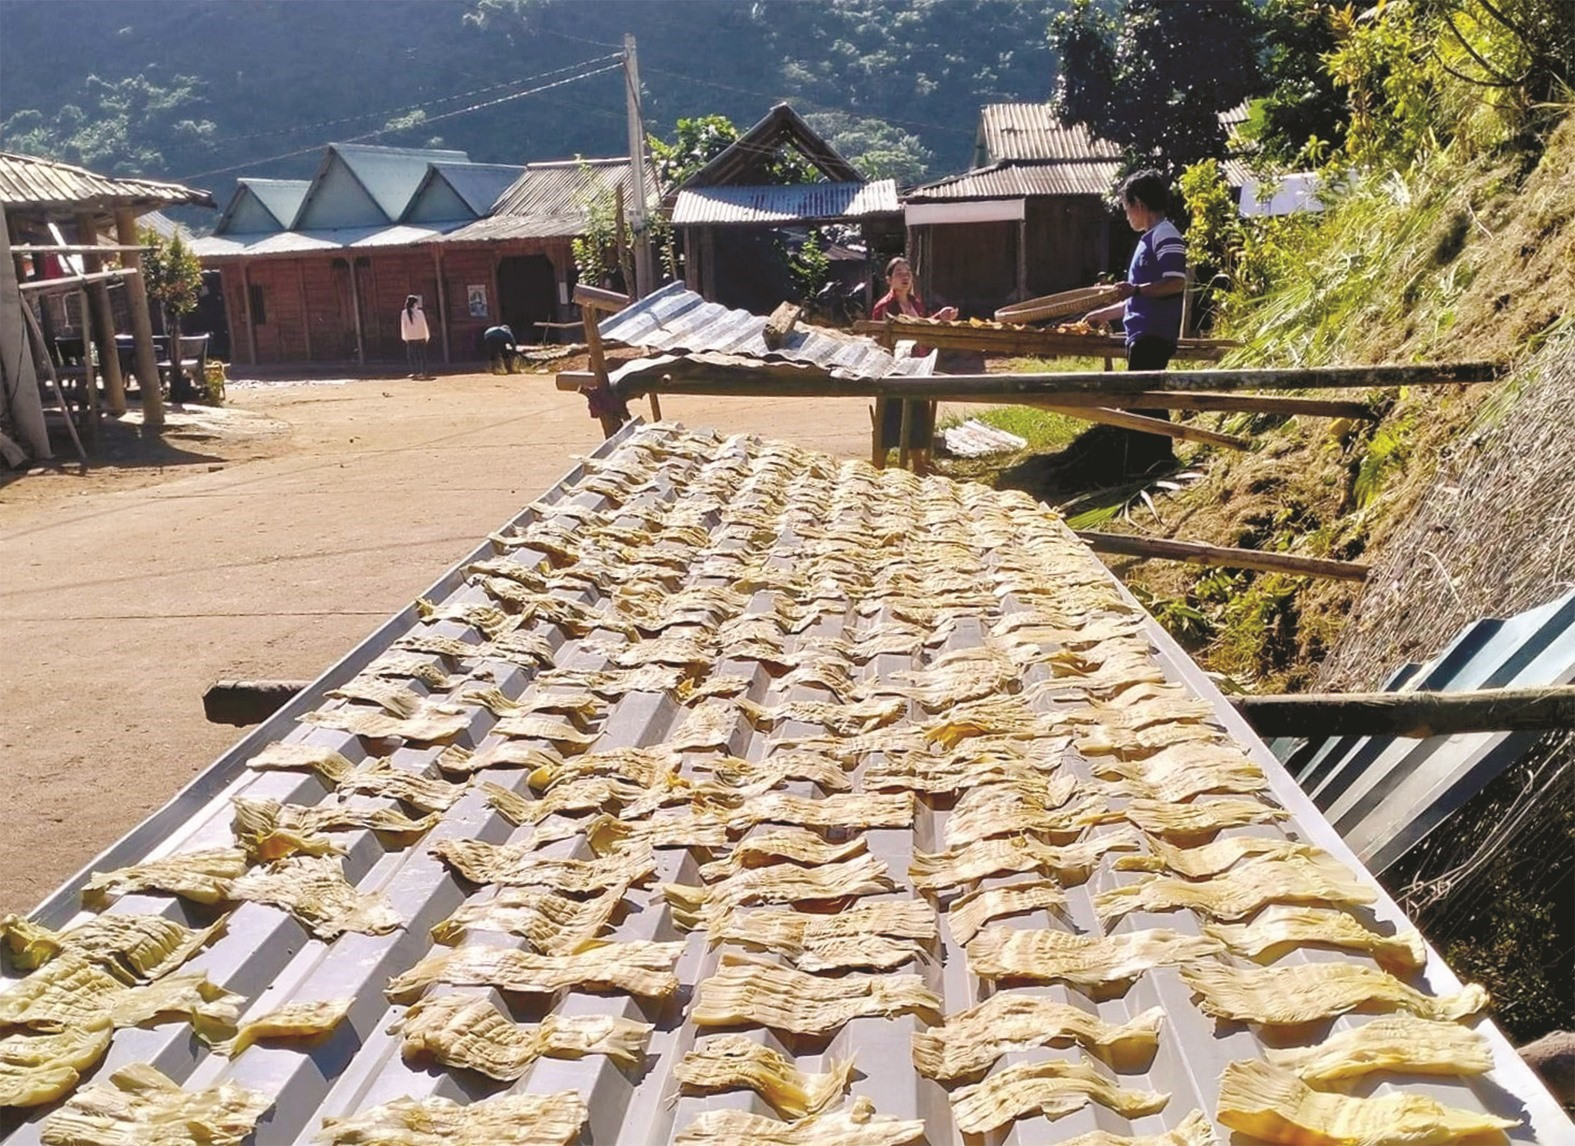 People usually take advantage of the sunshine to dry bamboo shoots.